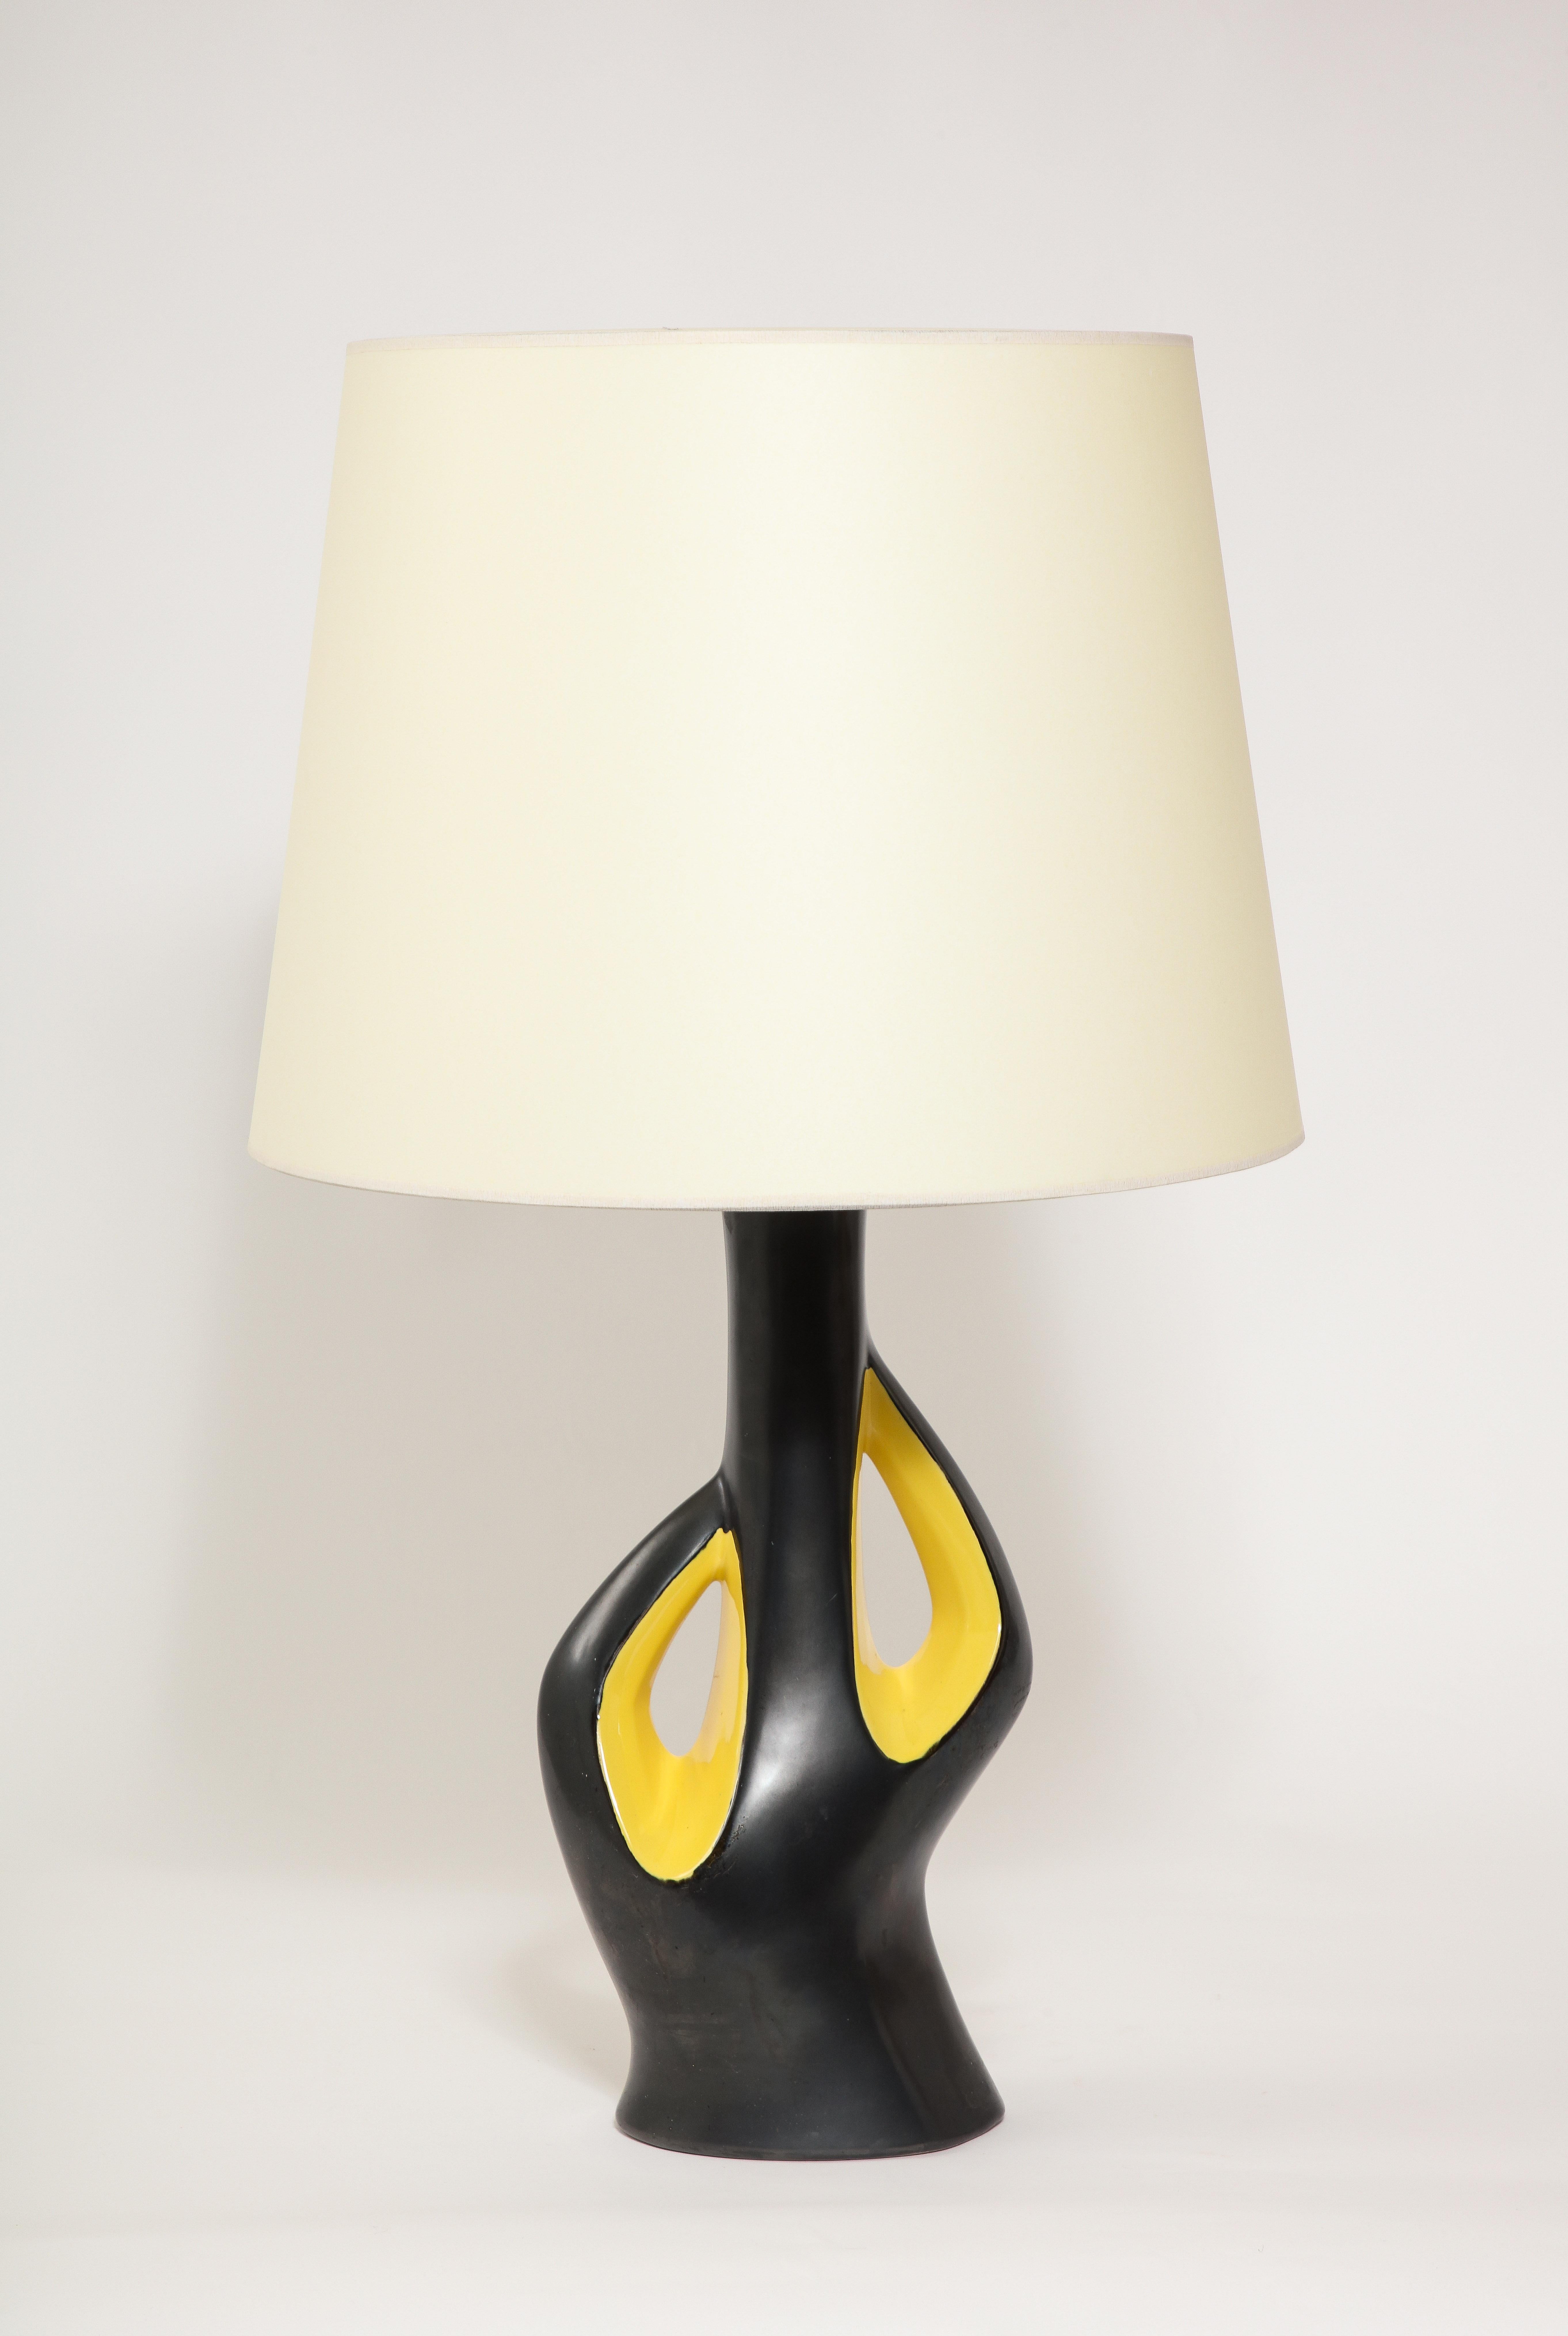 Large Elchinger Two-Tone Yellow & Black Ceramic Table Lamp, France 1950's For Sale 5